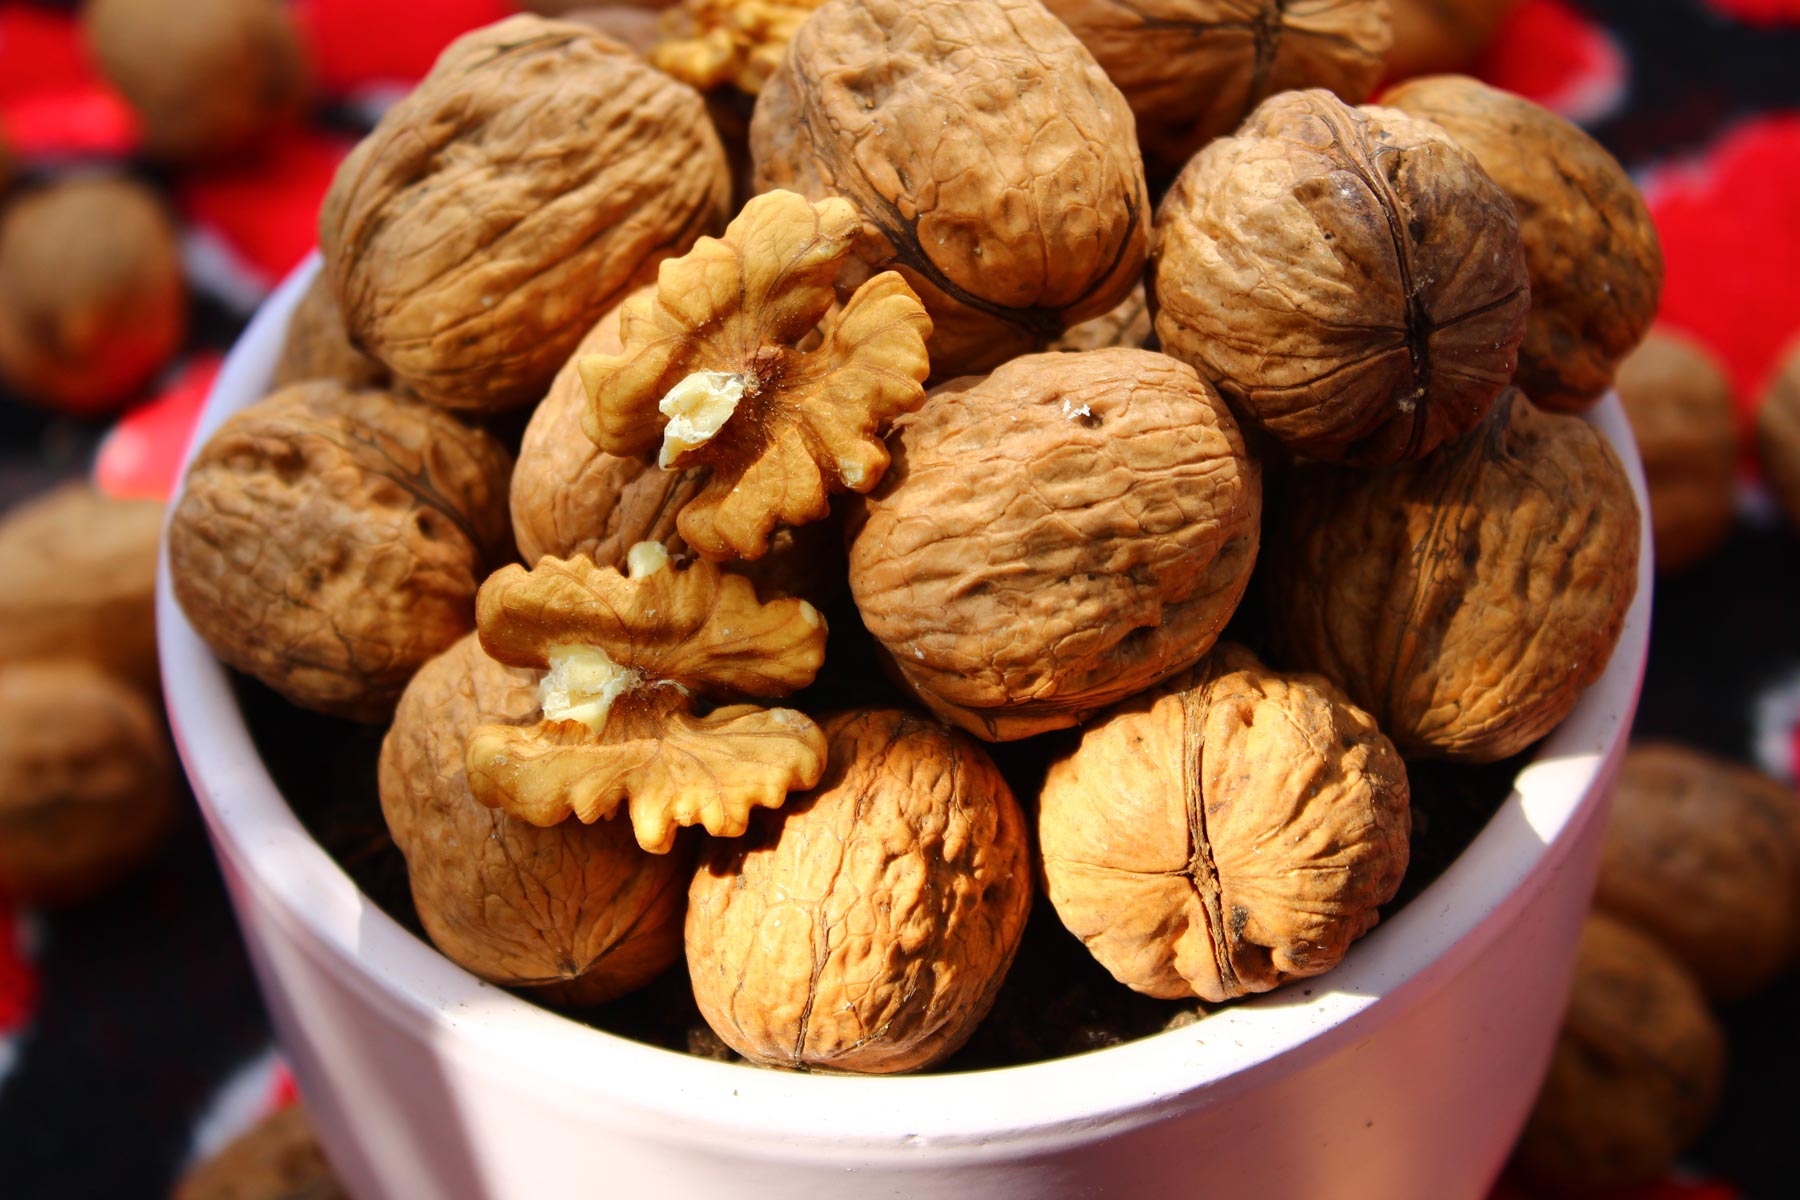 Walnuts are a great source of omega-3